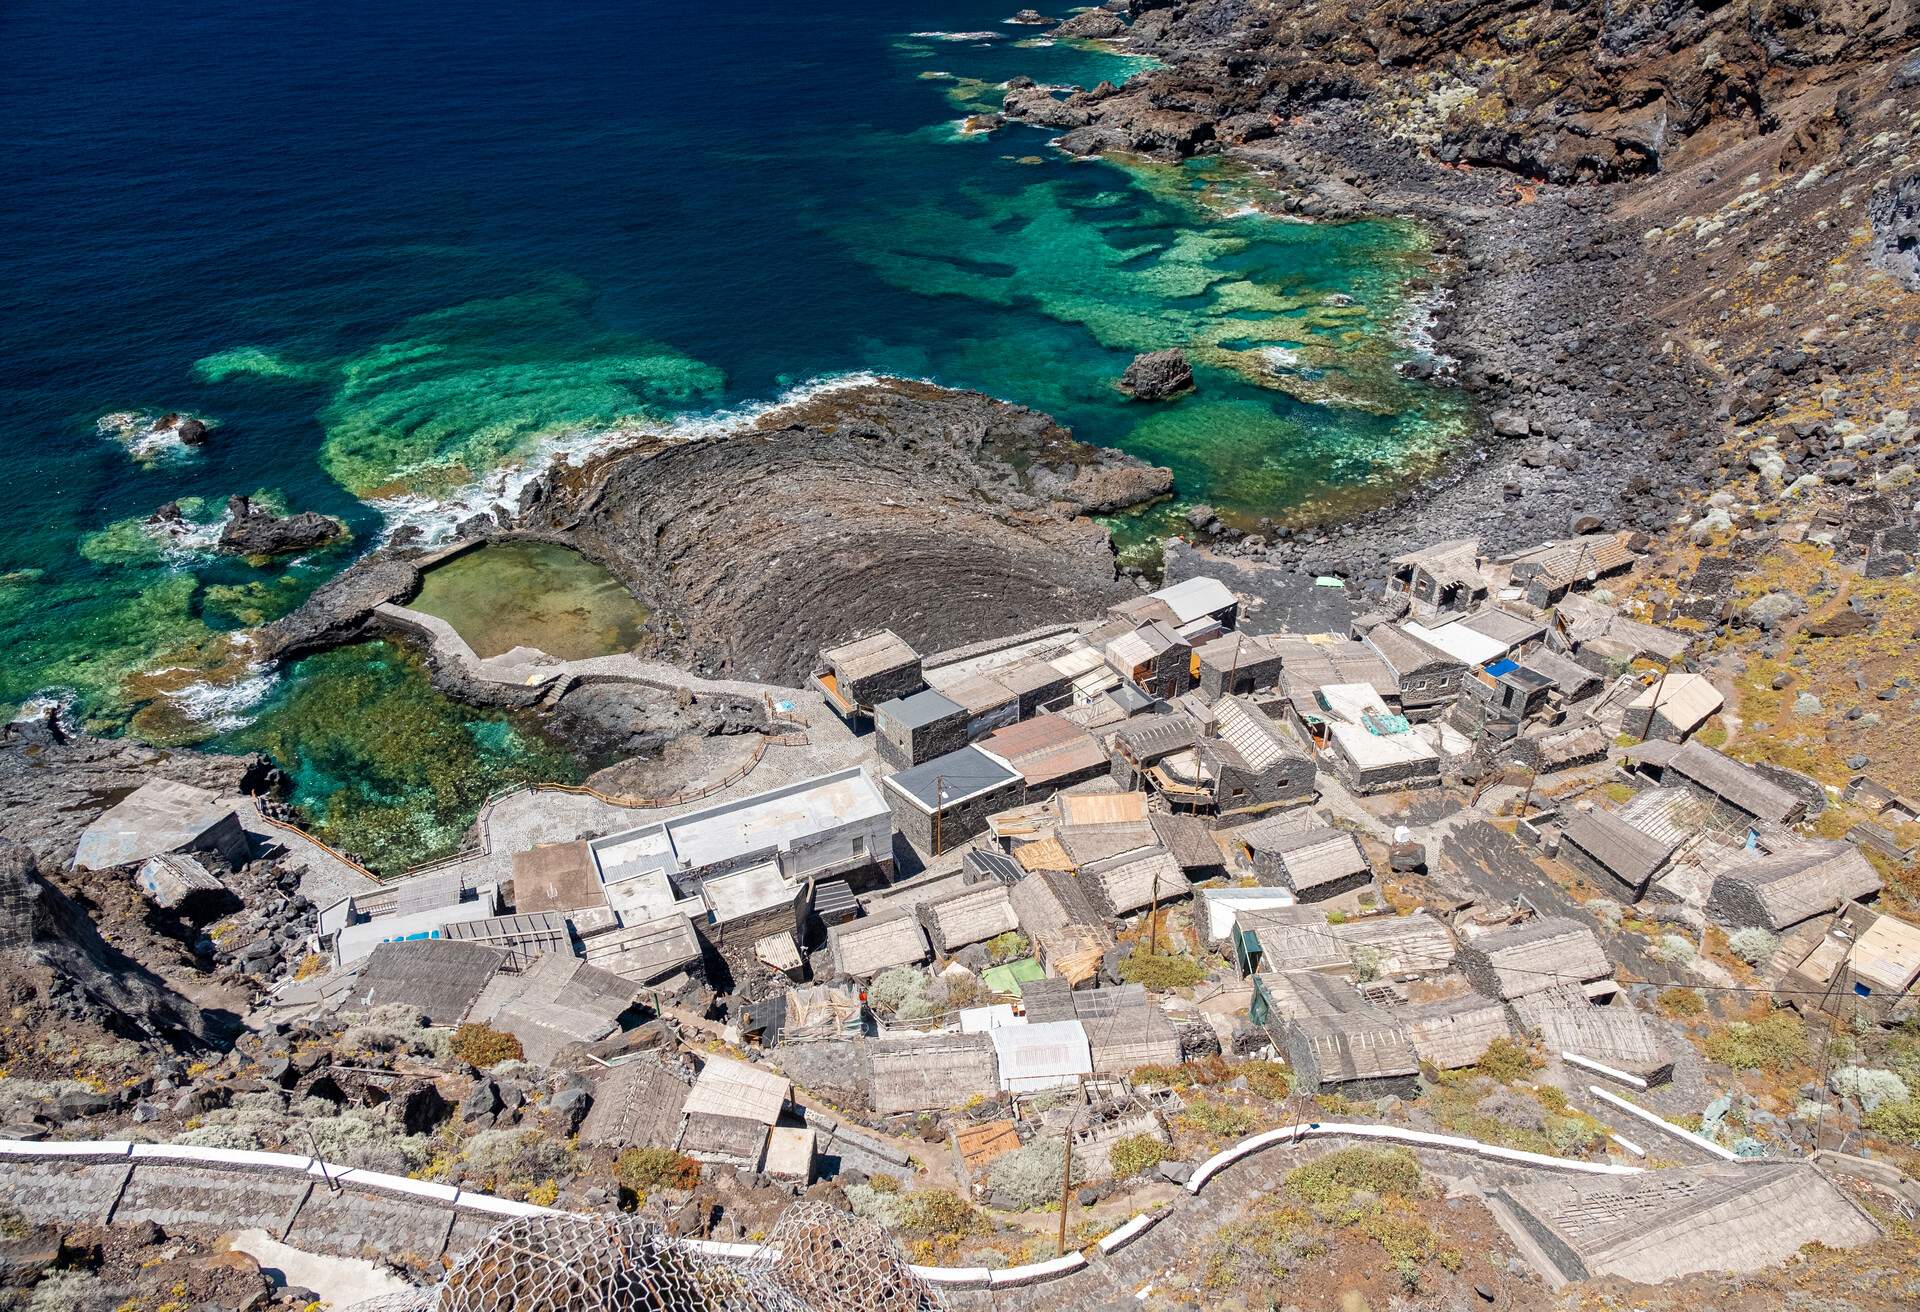 Stock photo of a volcanic coastline with turquoise blue water in an abandoned village. Aerial view of El Pozo de las Calcosas, El Hierro, Canary Island.